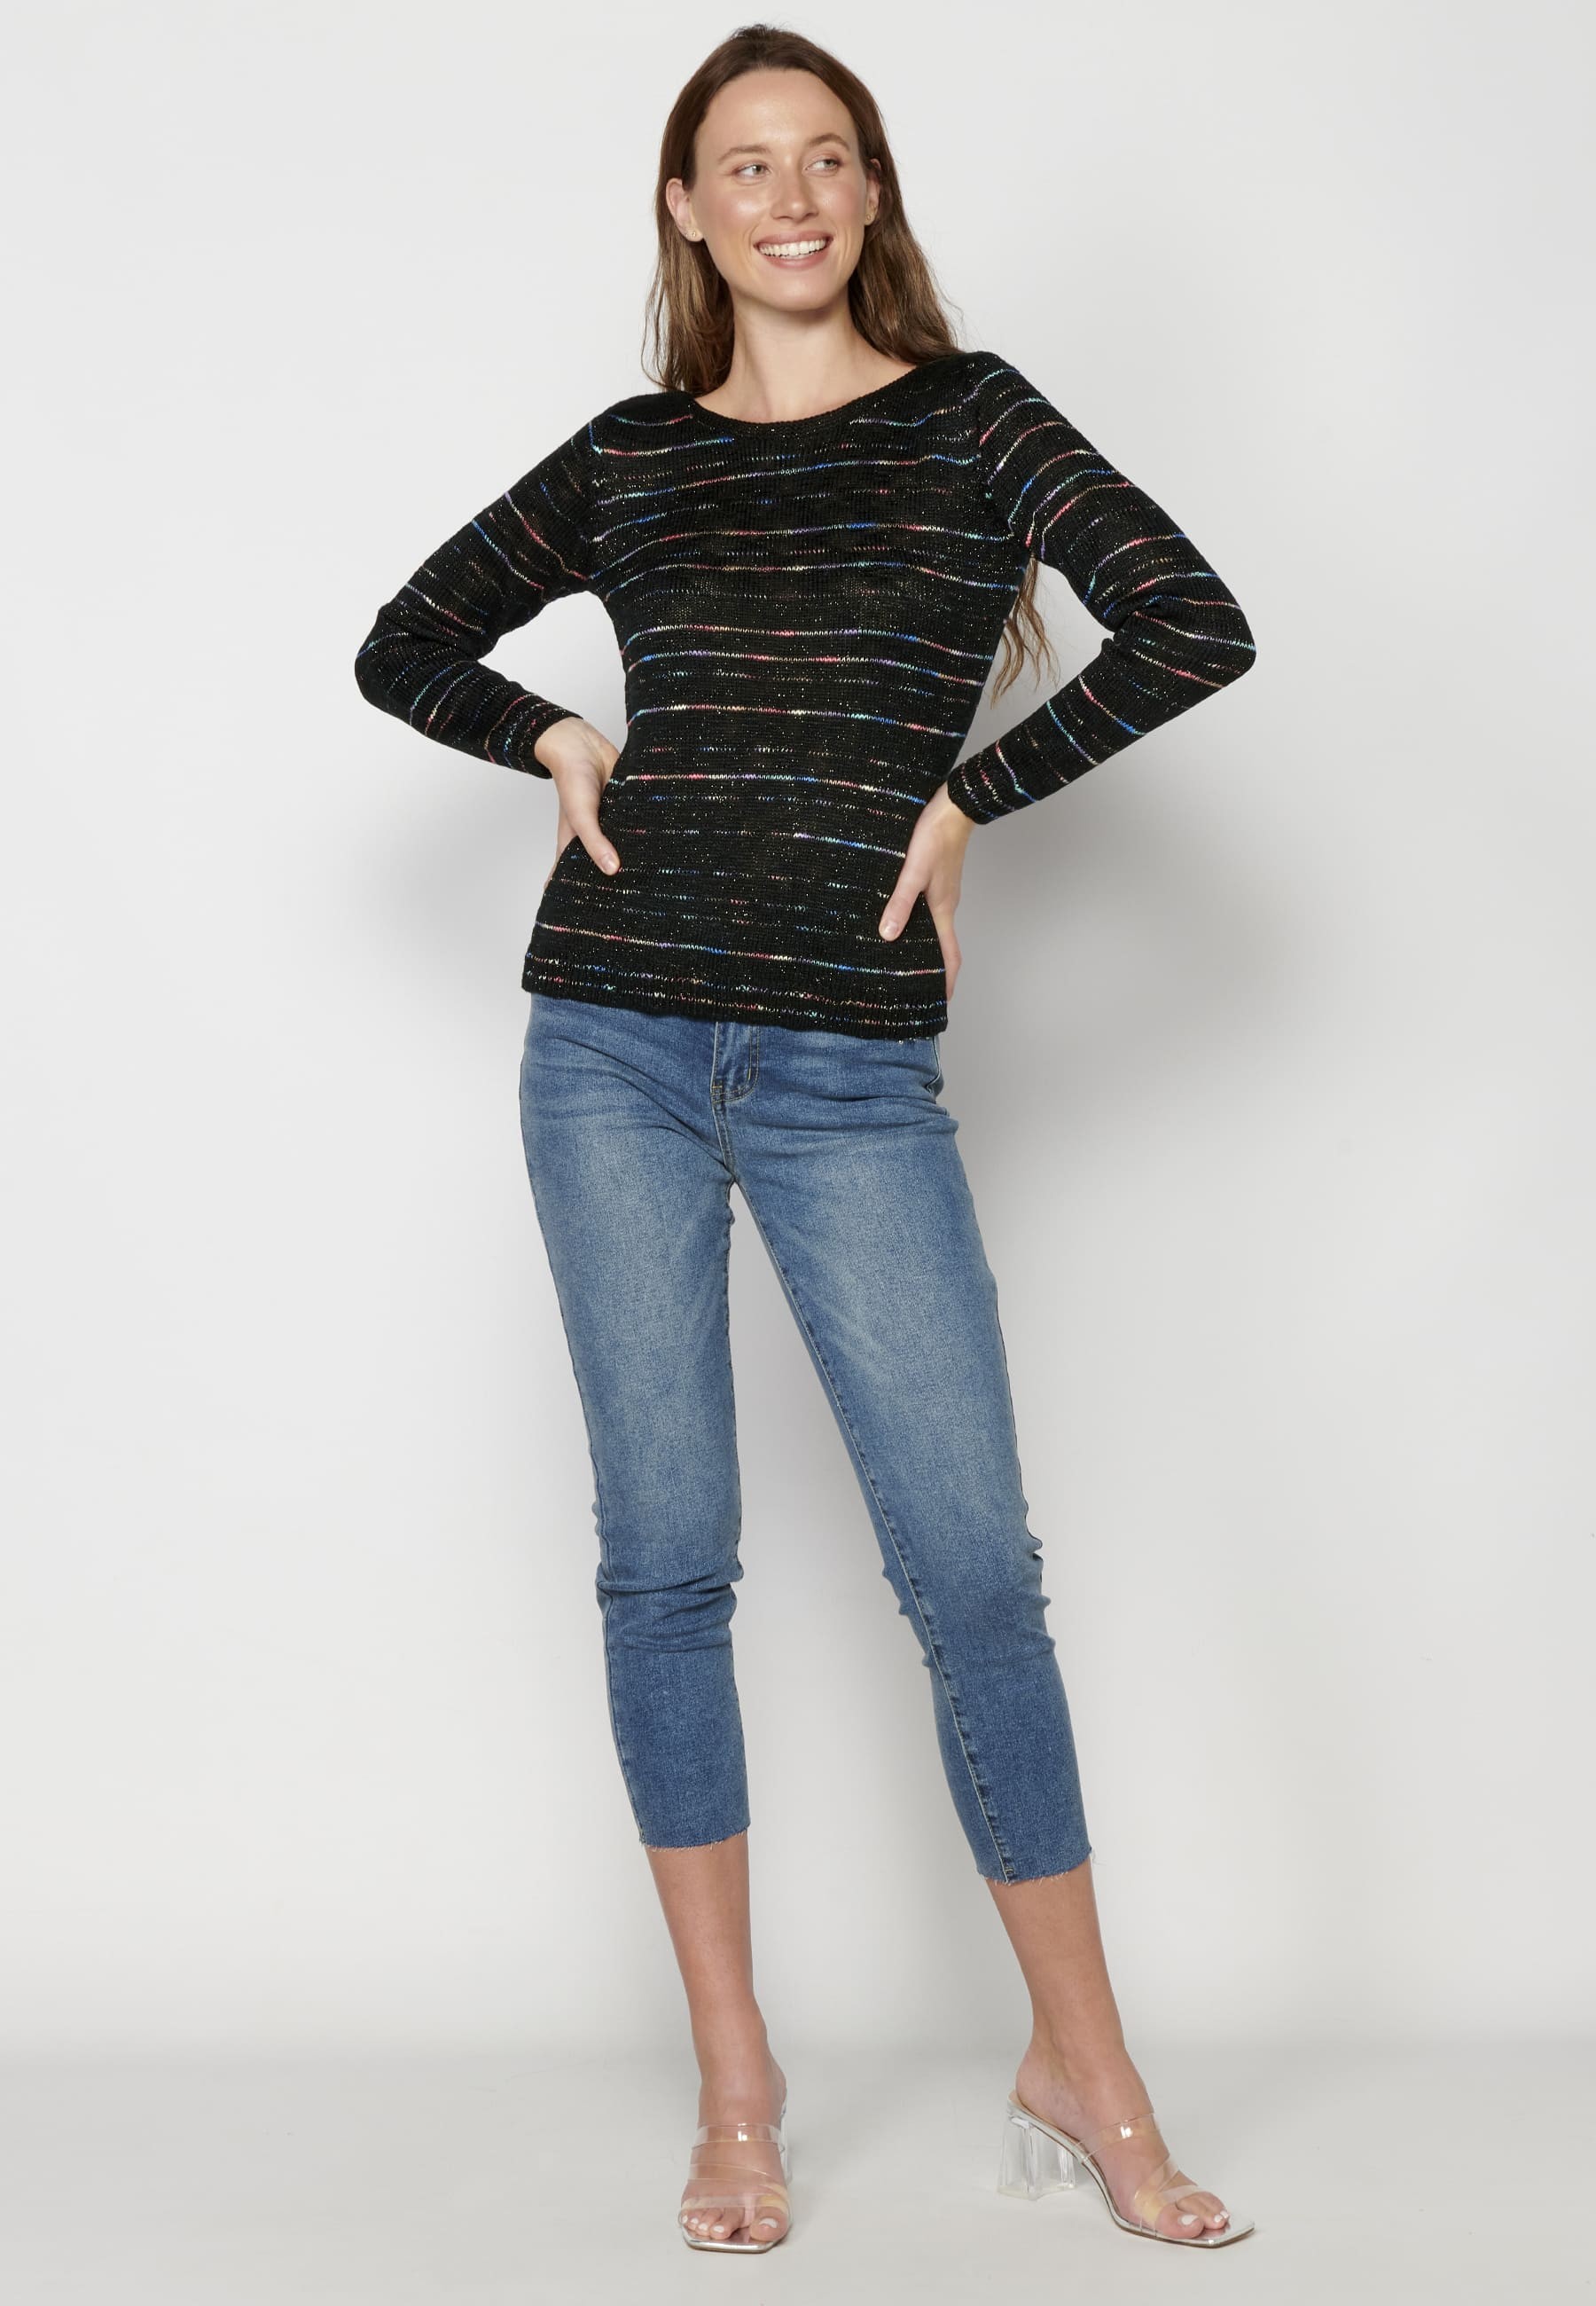 Long-sleeved sweater with openwork detail for Woman